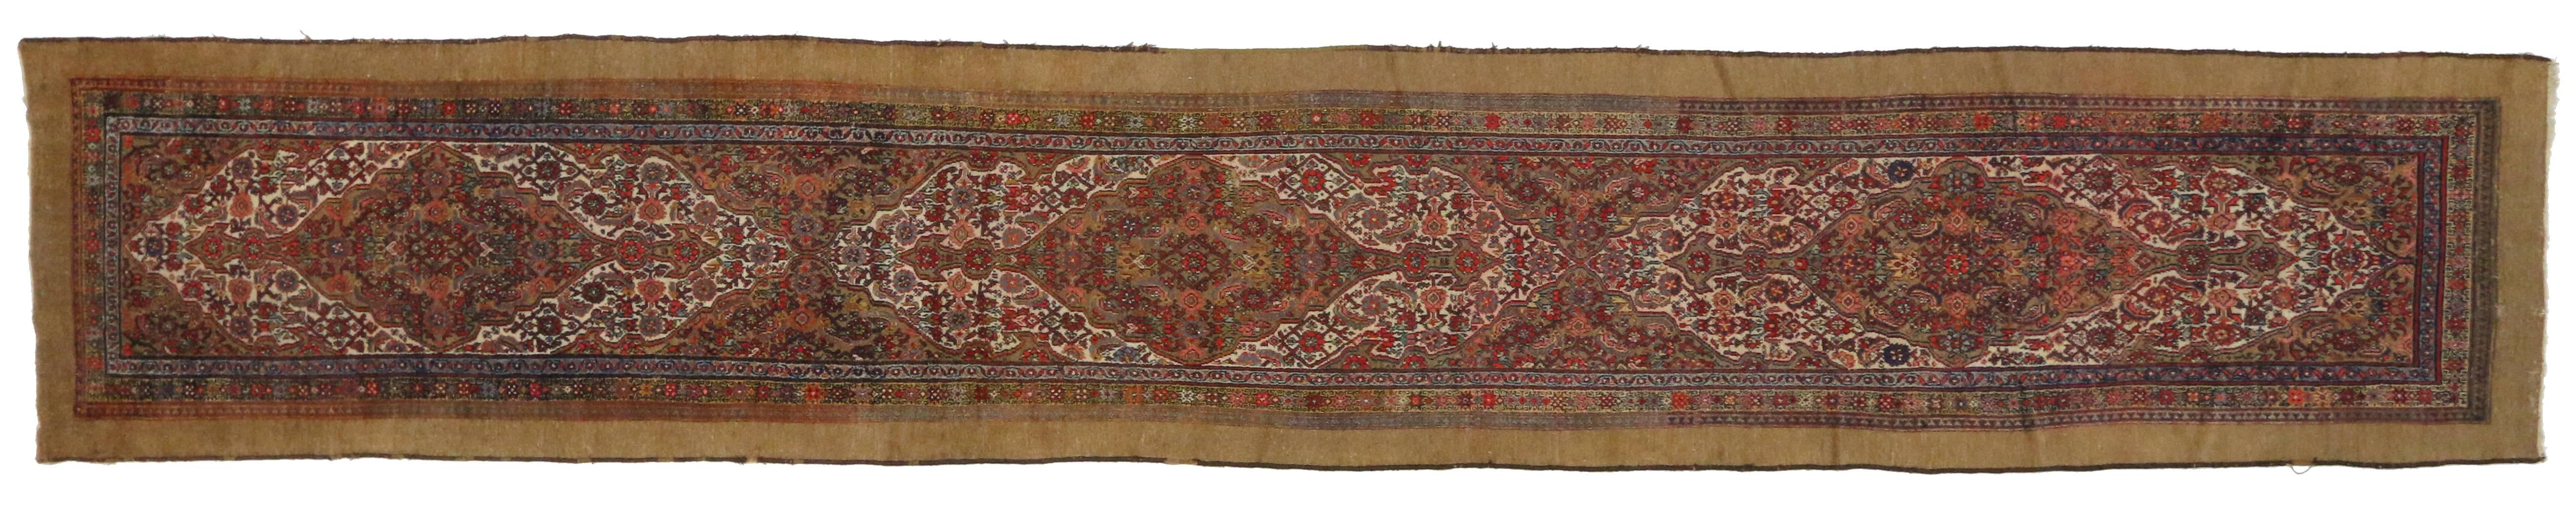 Antique Persian Malayer Rug with Camel Hair, Long Persian Runner For Sale 6